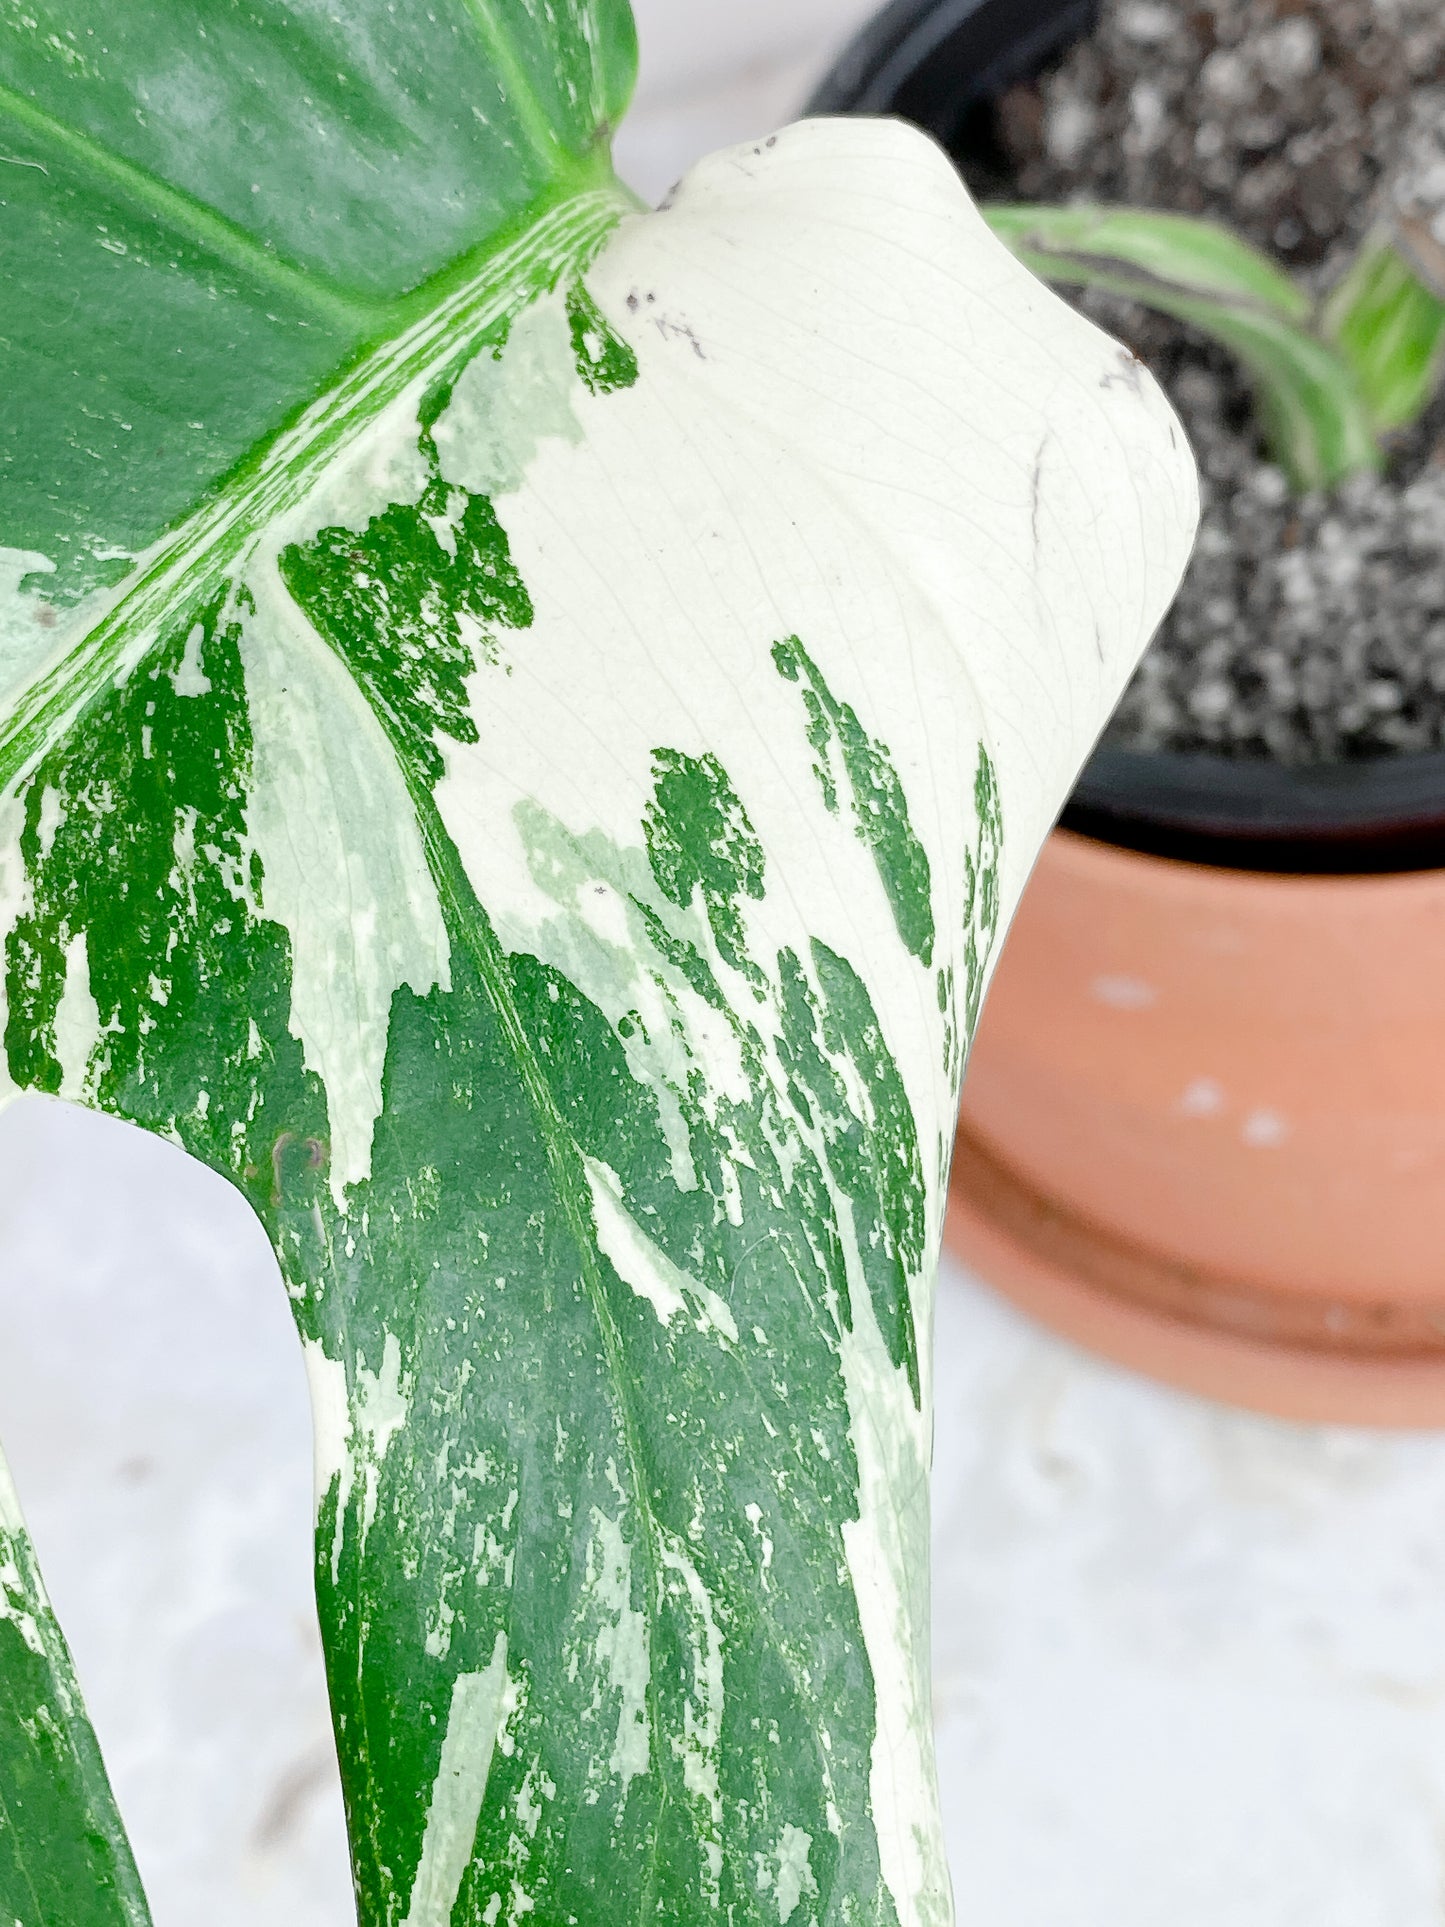 Monstera Albo Variegated rooted